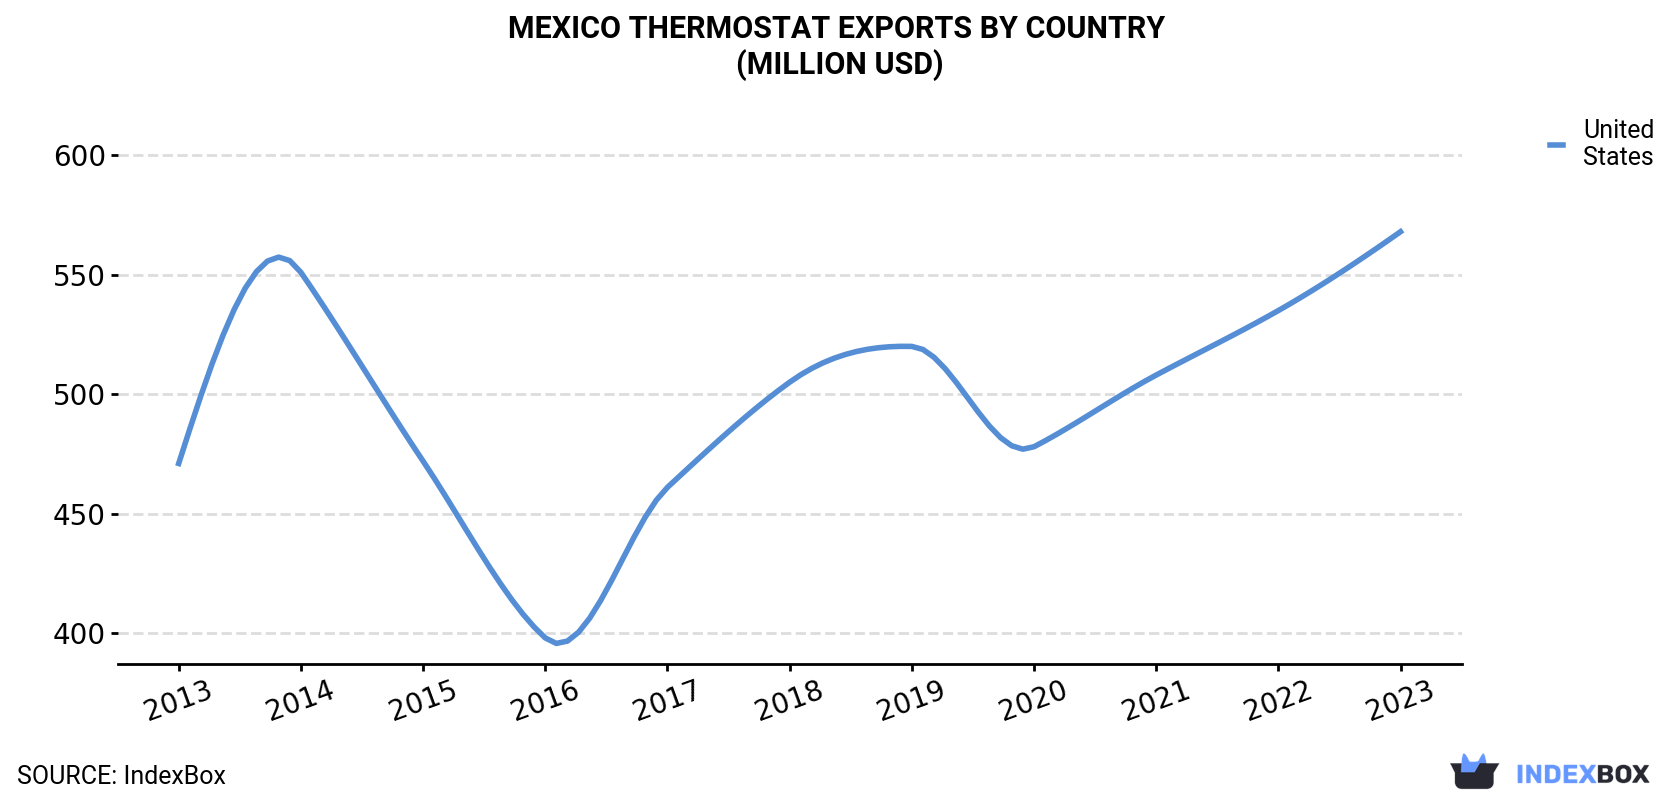 Mexico Thermostat Exports By Country (Million USD)